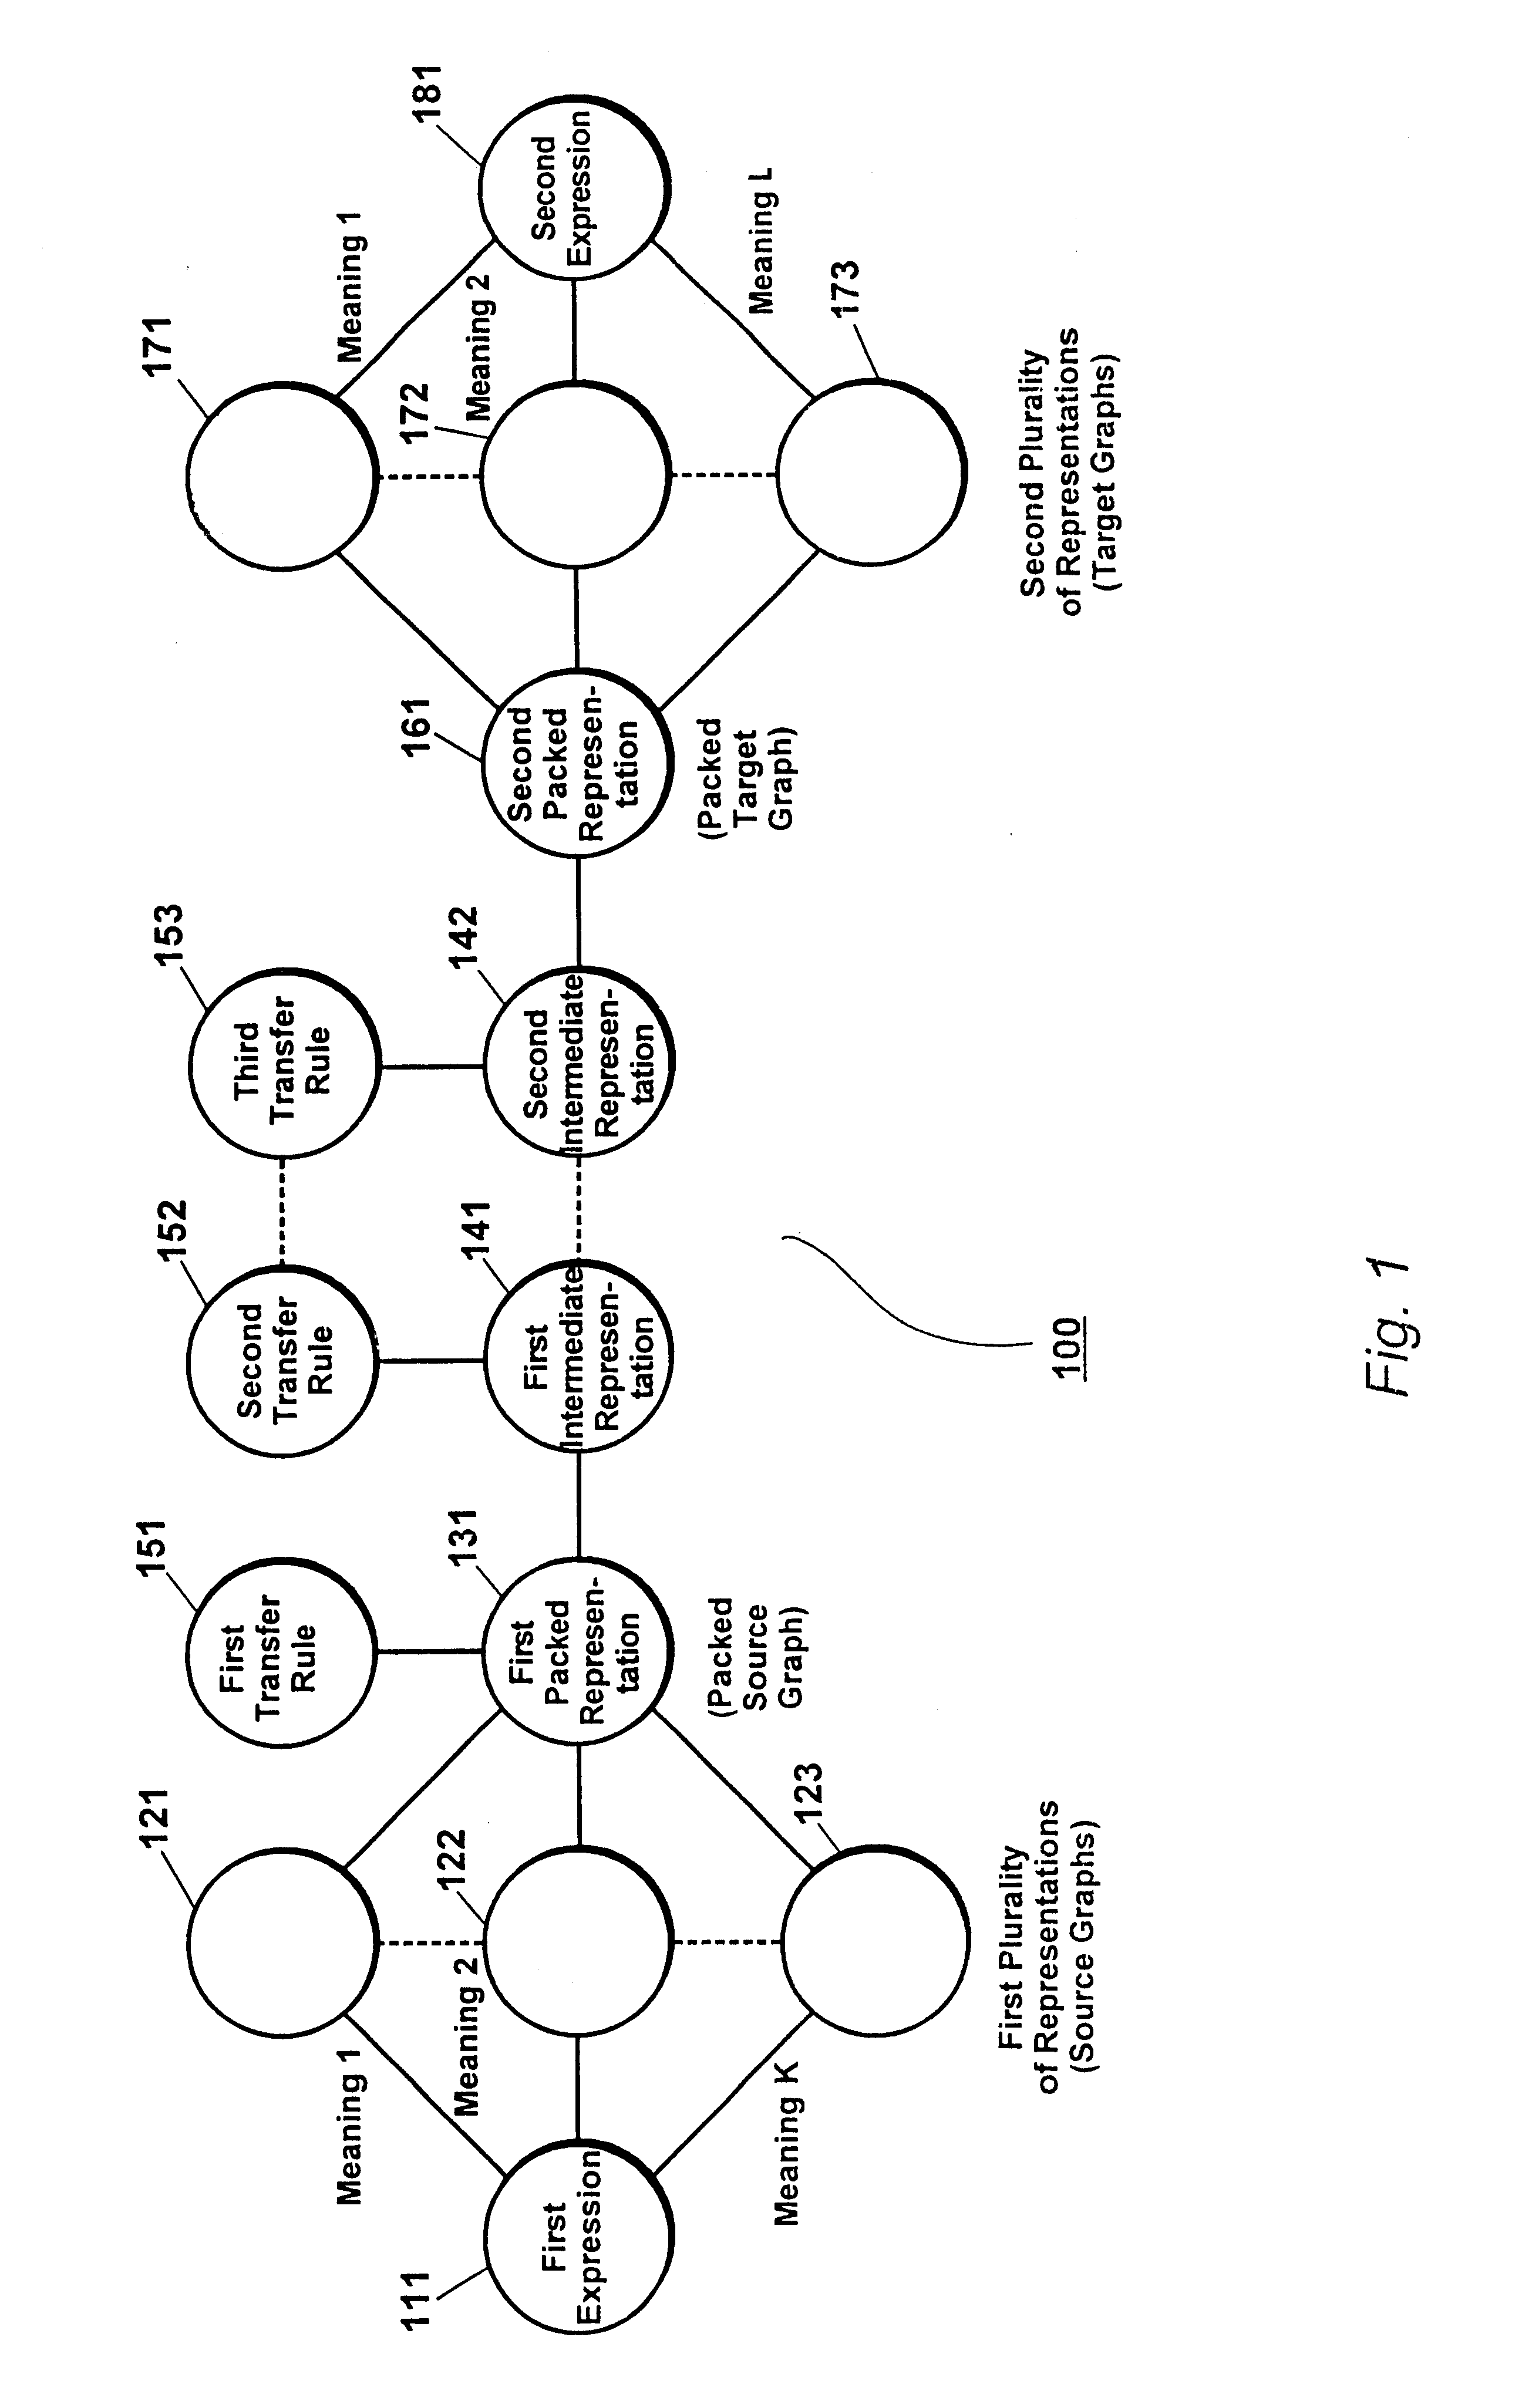 System and method for transferring packed linguistic structures